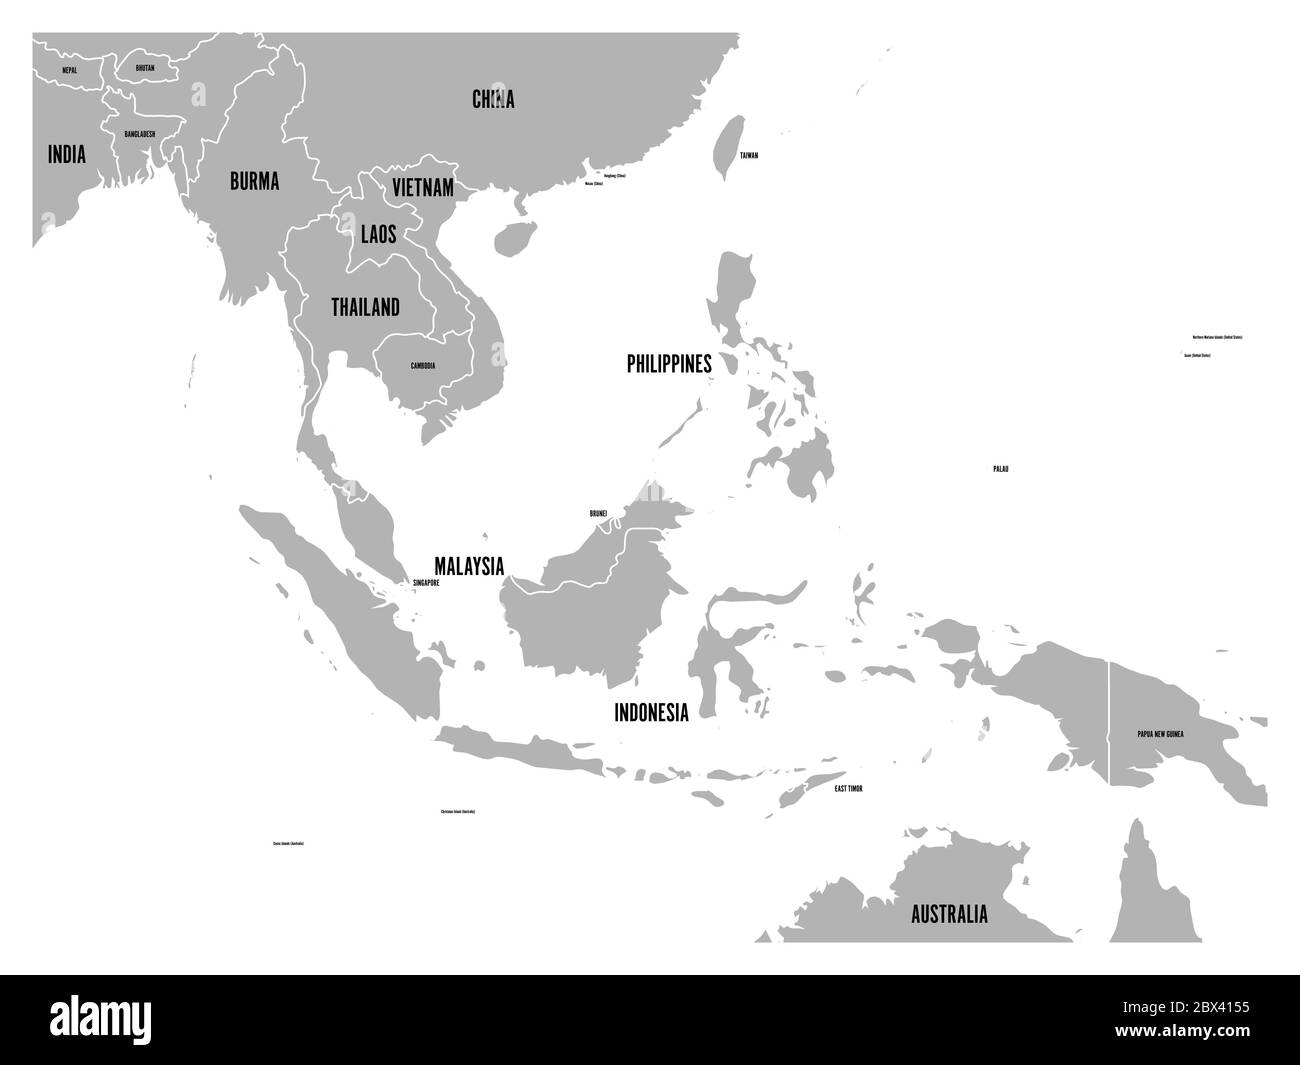 South East Asia political map. Grey land on white background with black country name labels. Simple flat vector illustration. Stock Vector